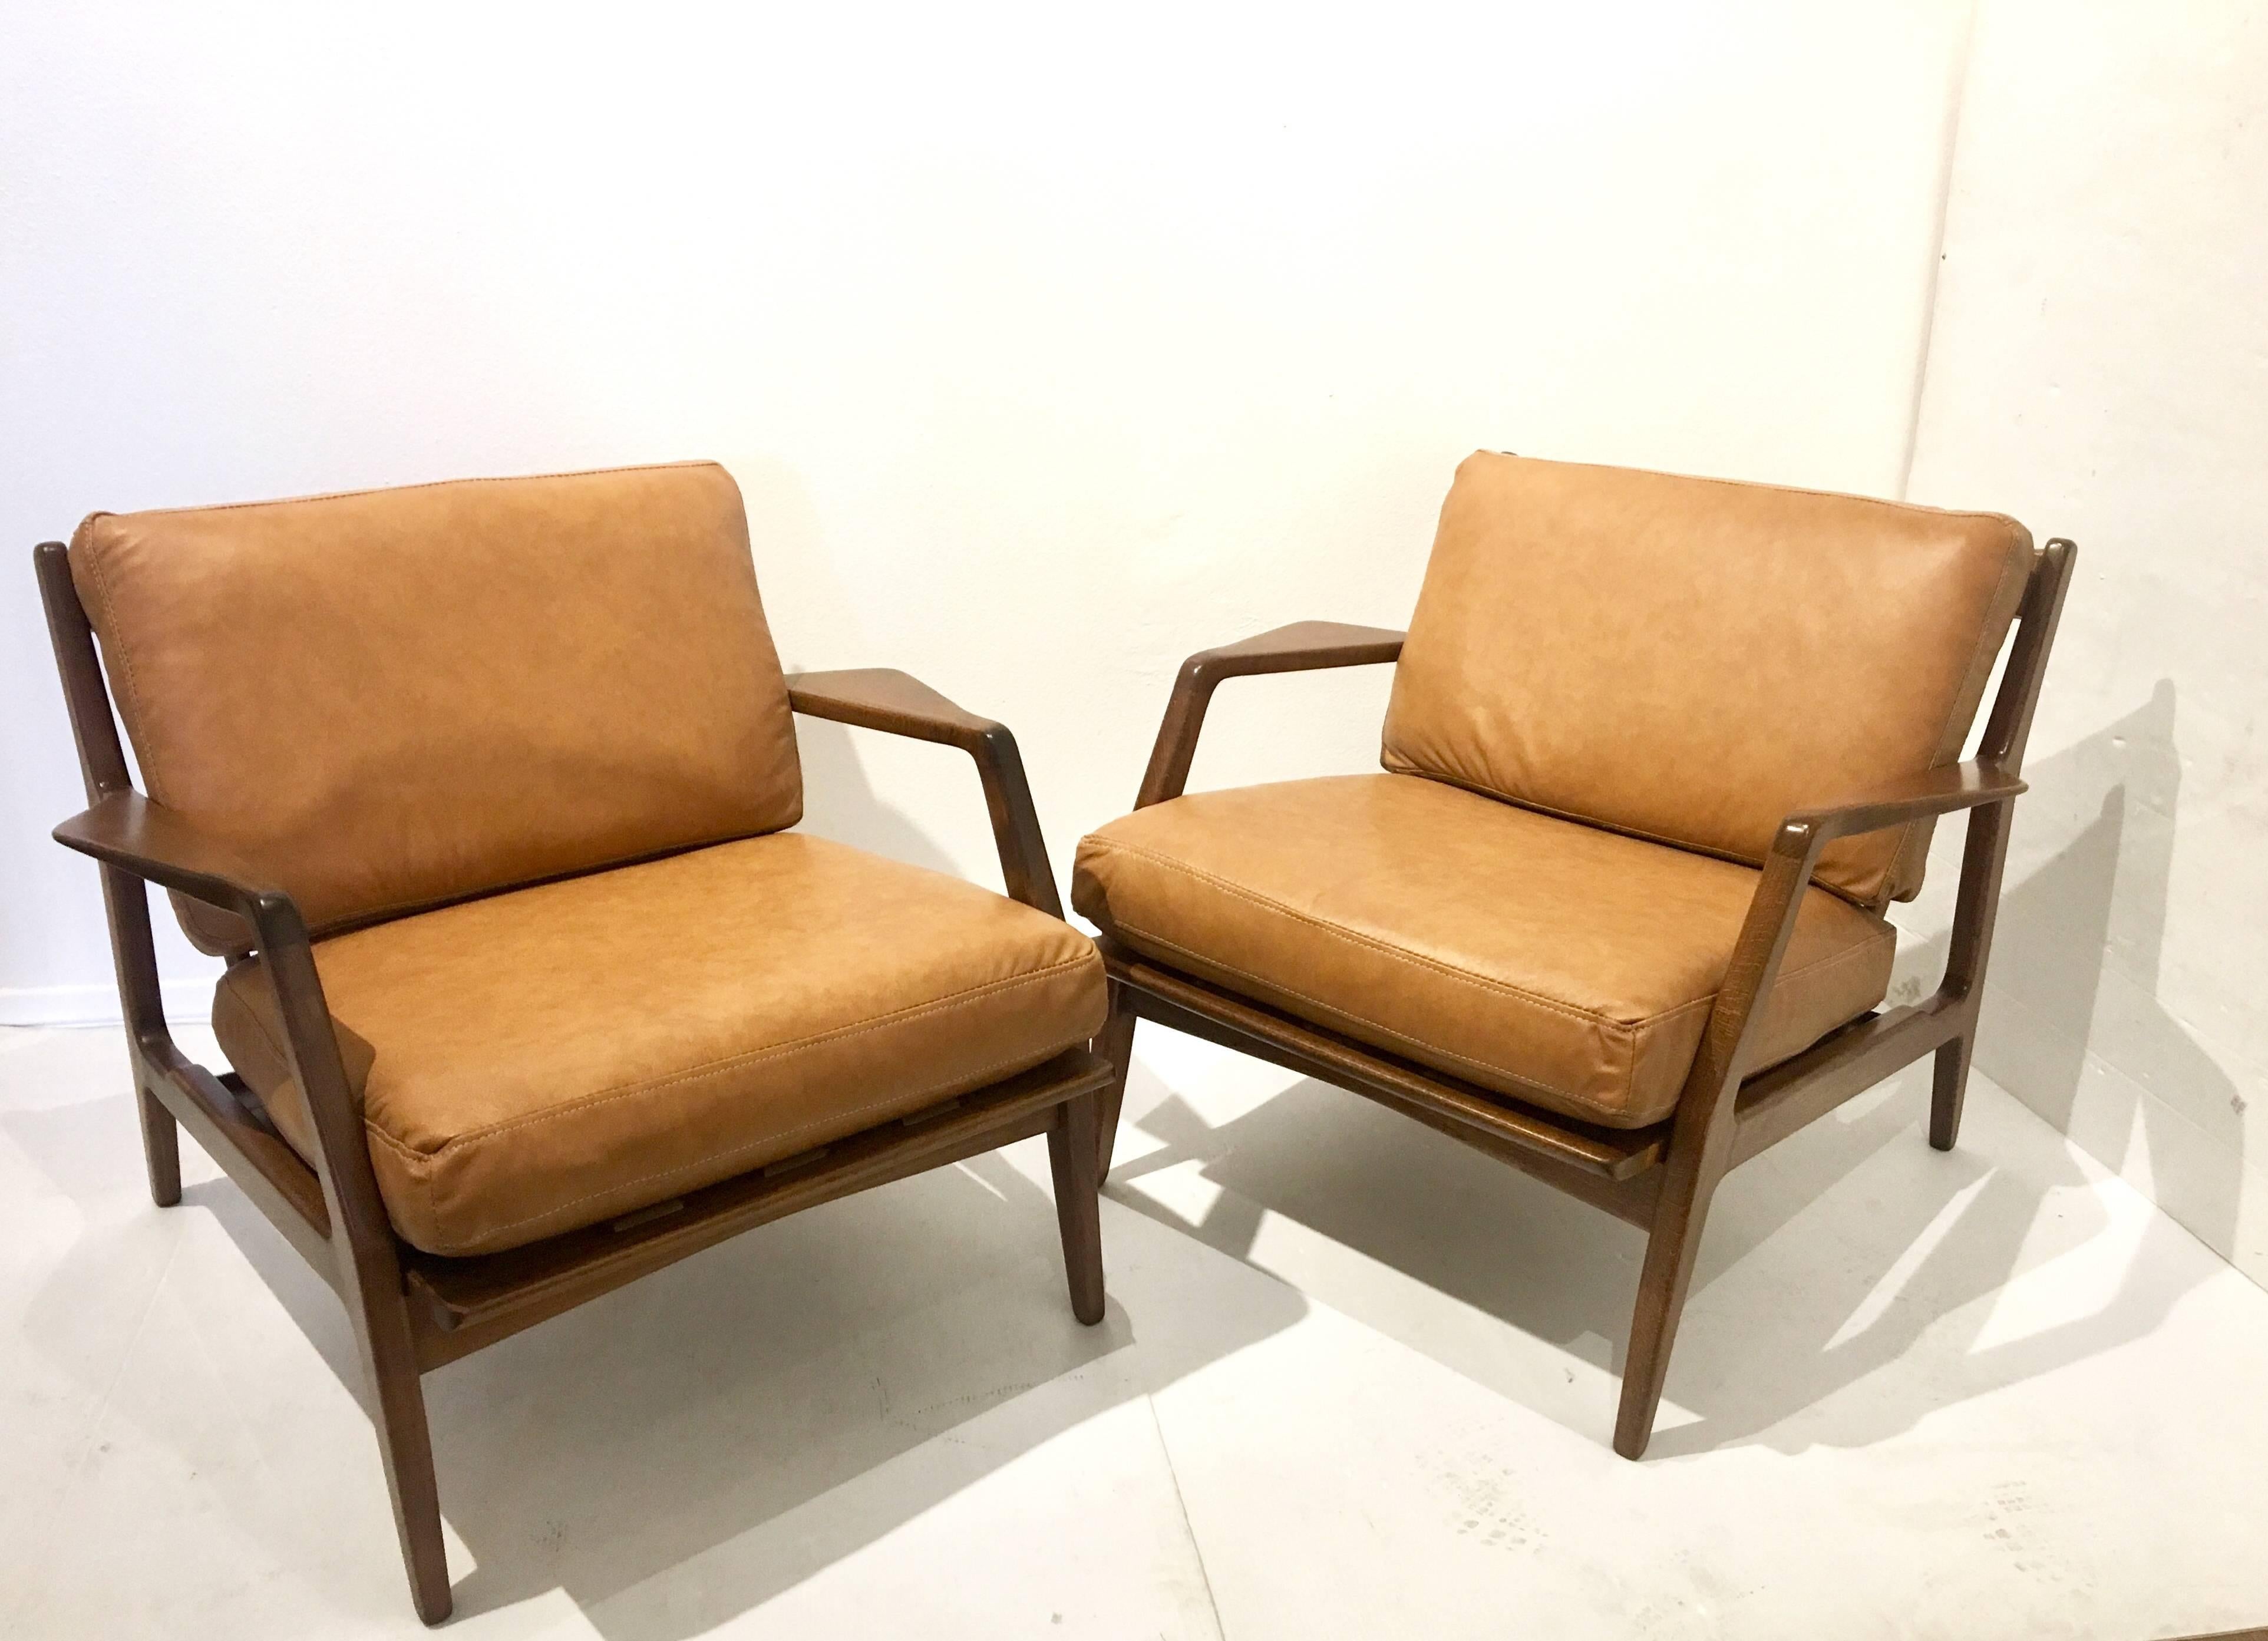 Elegant pair of lounge chairs by Kofod Larsen in camel color leather, freshly recovered and refinished in a walnut stain, solid and sturdy made in Denmark, circa 1950s.